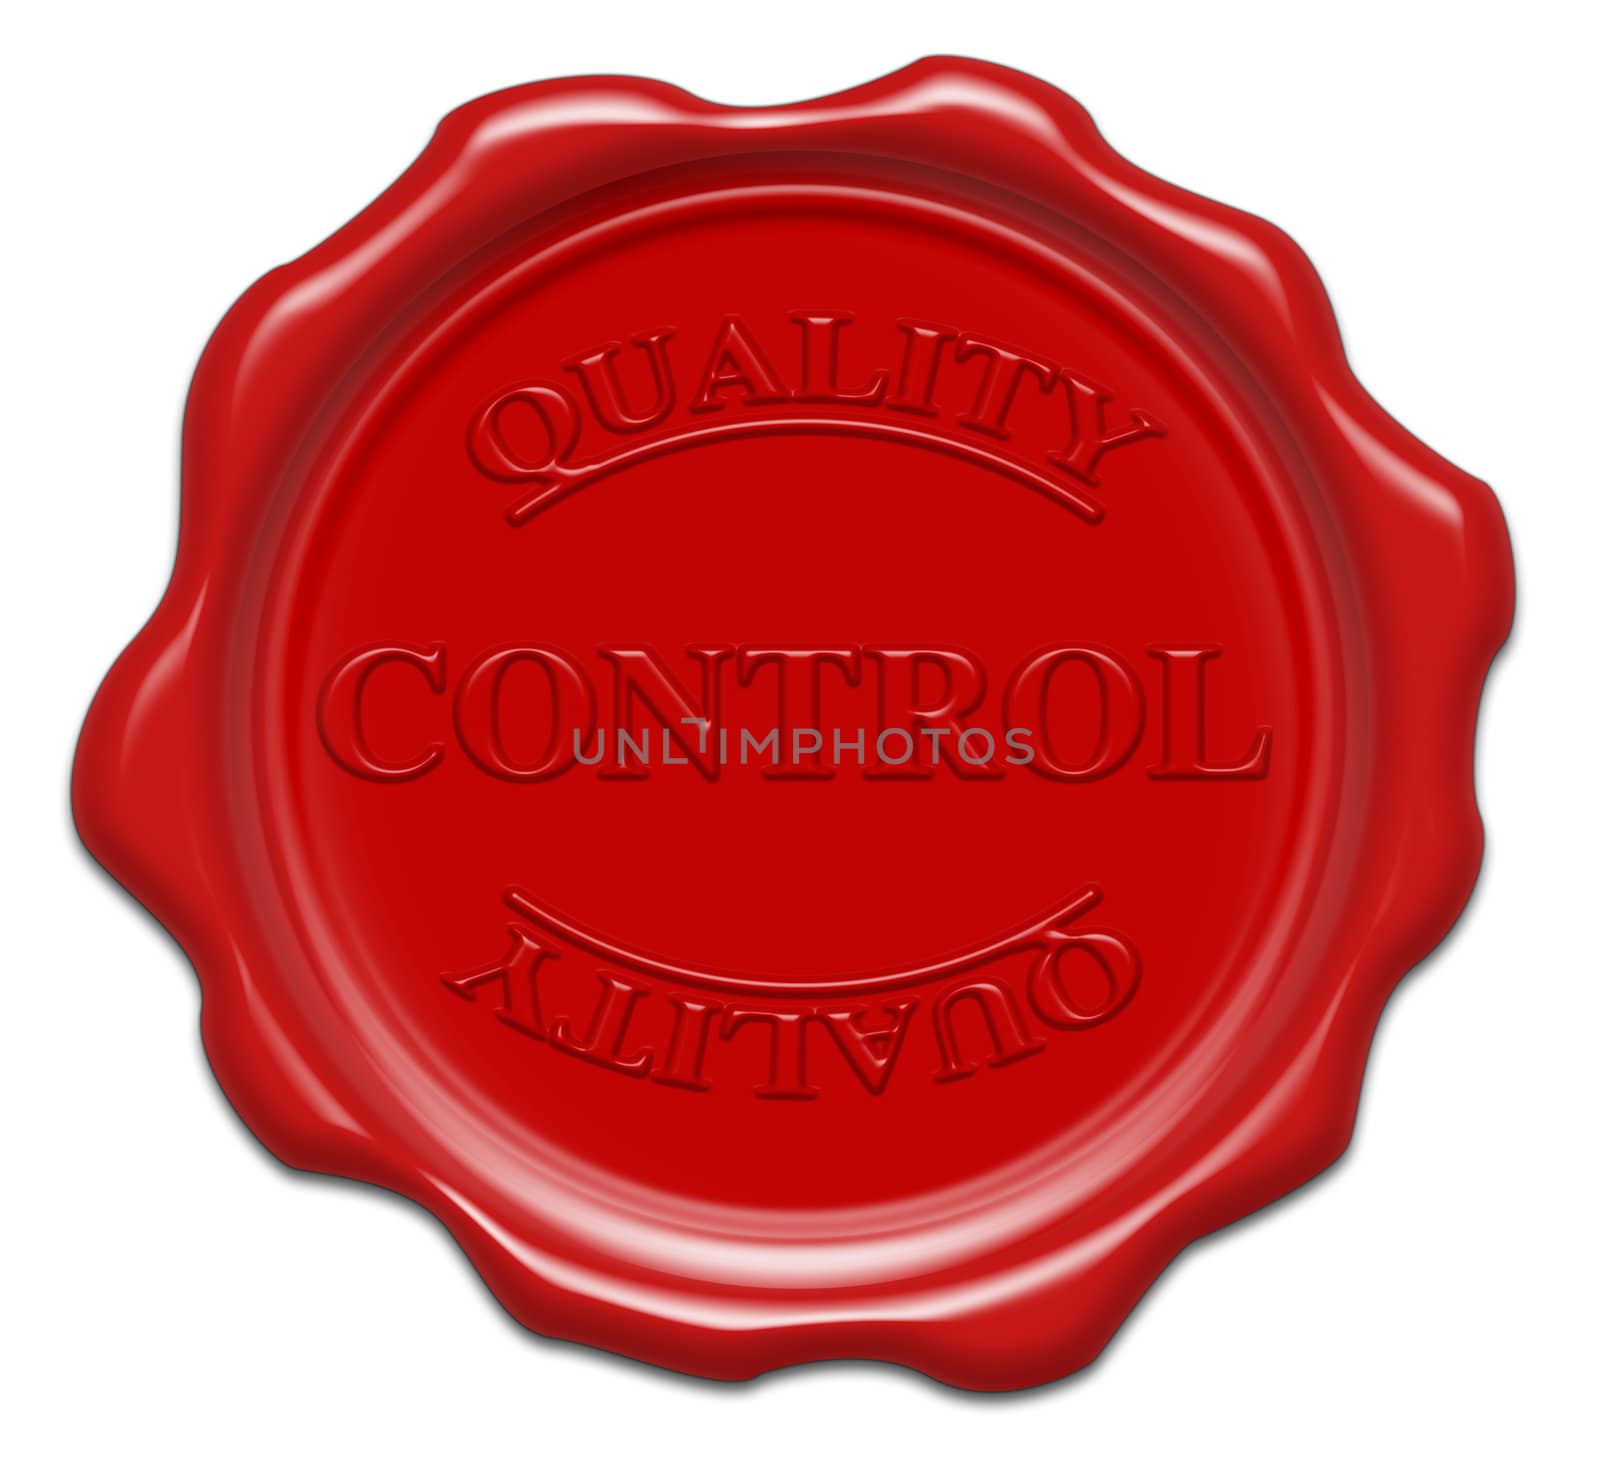 quality control - illustration red wax seal isolated on white ba by mozzyb